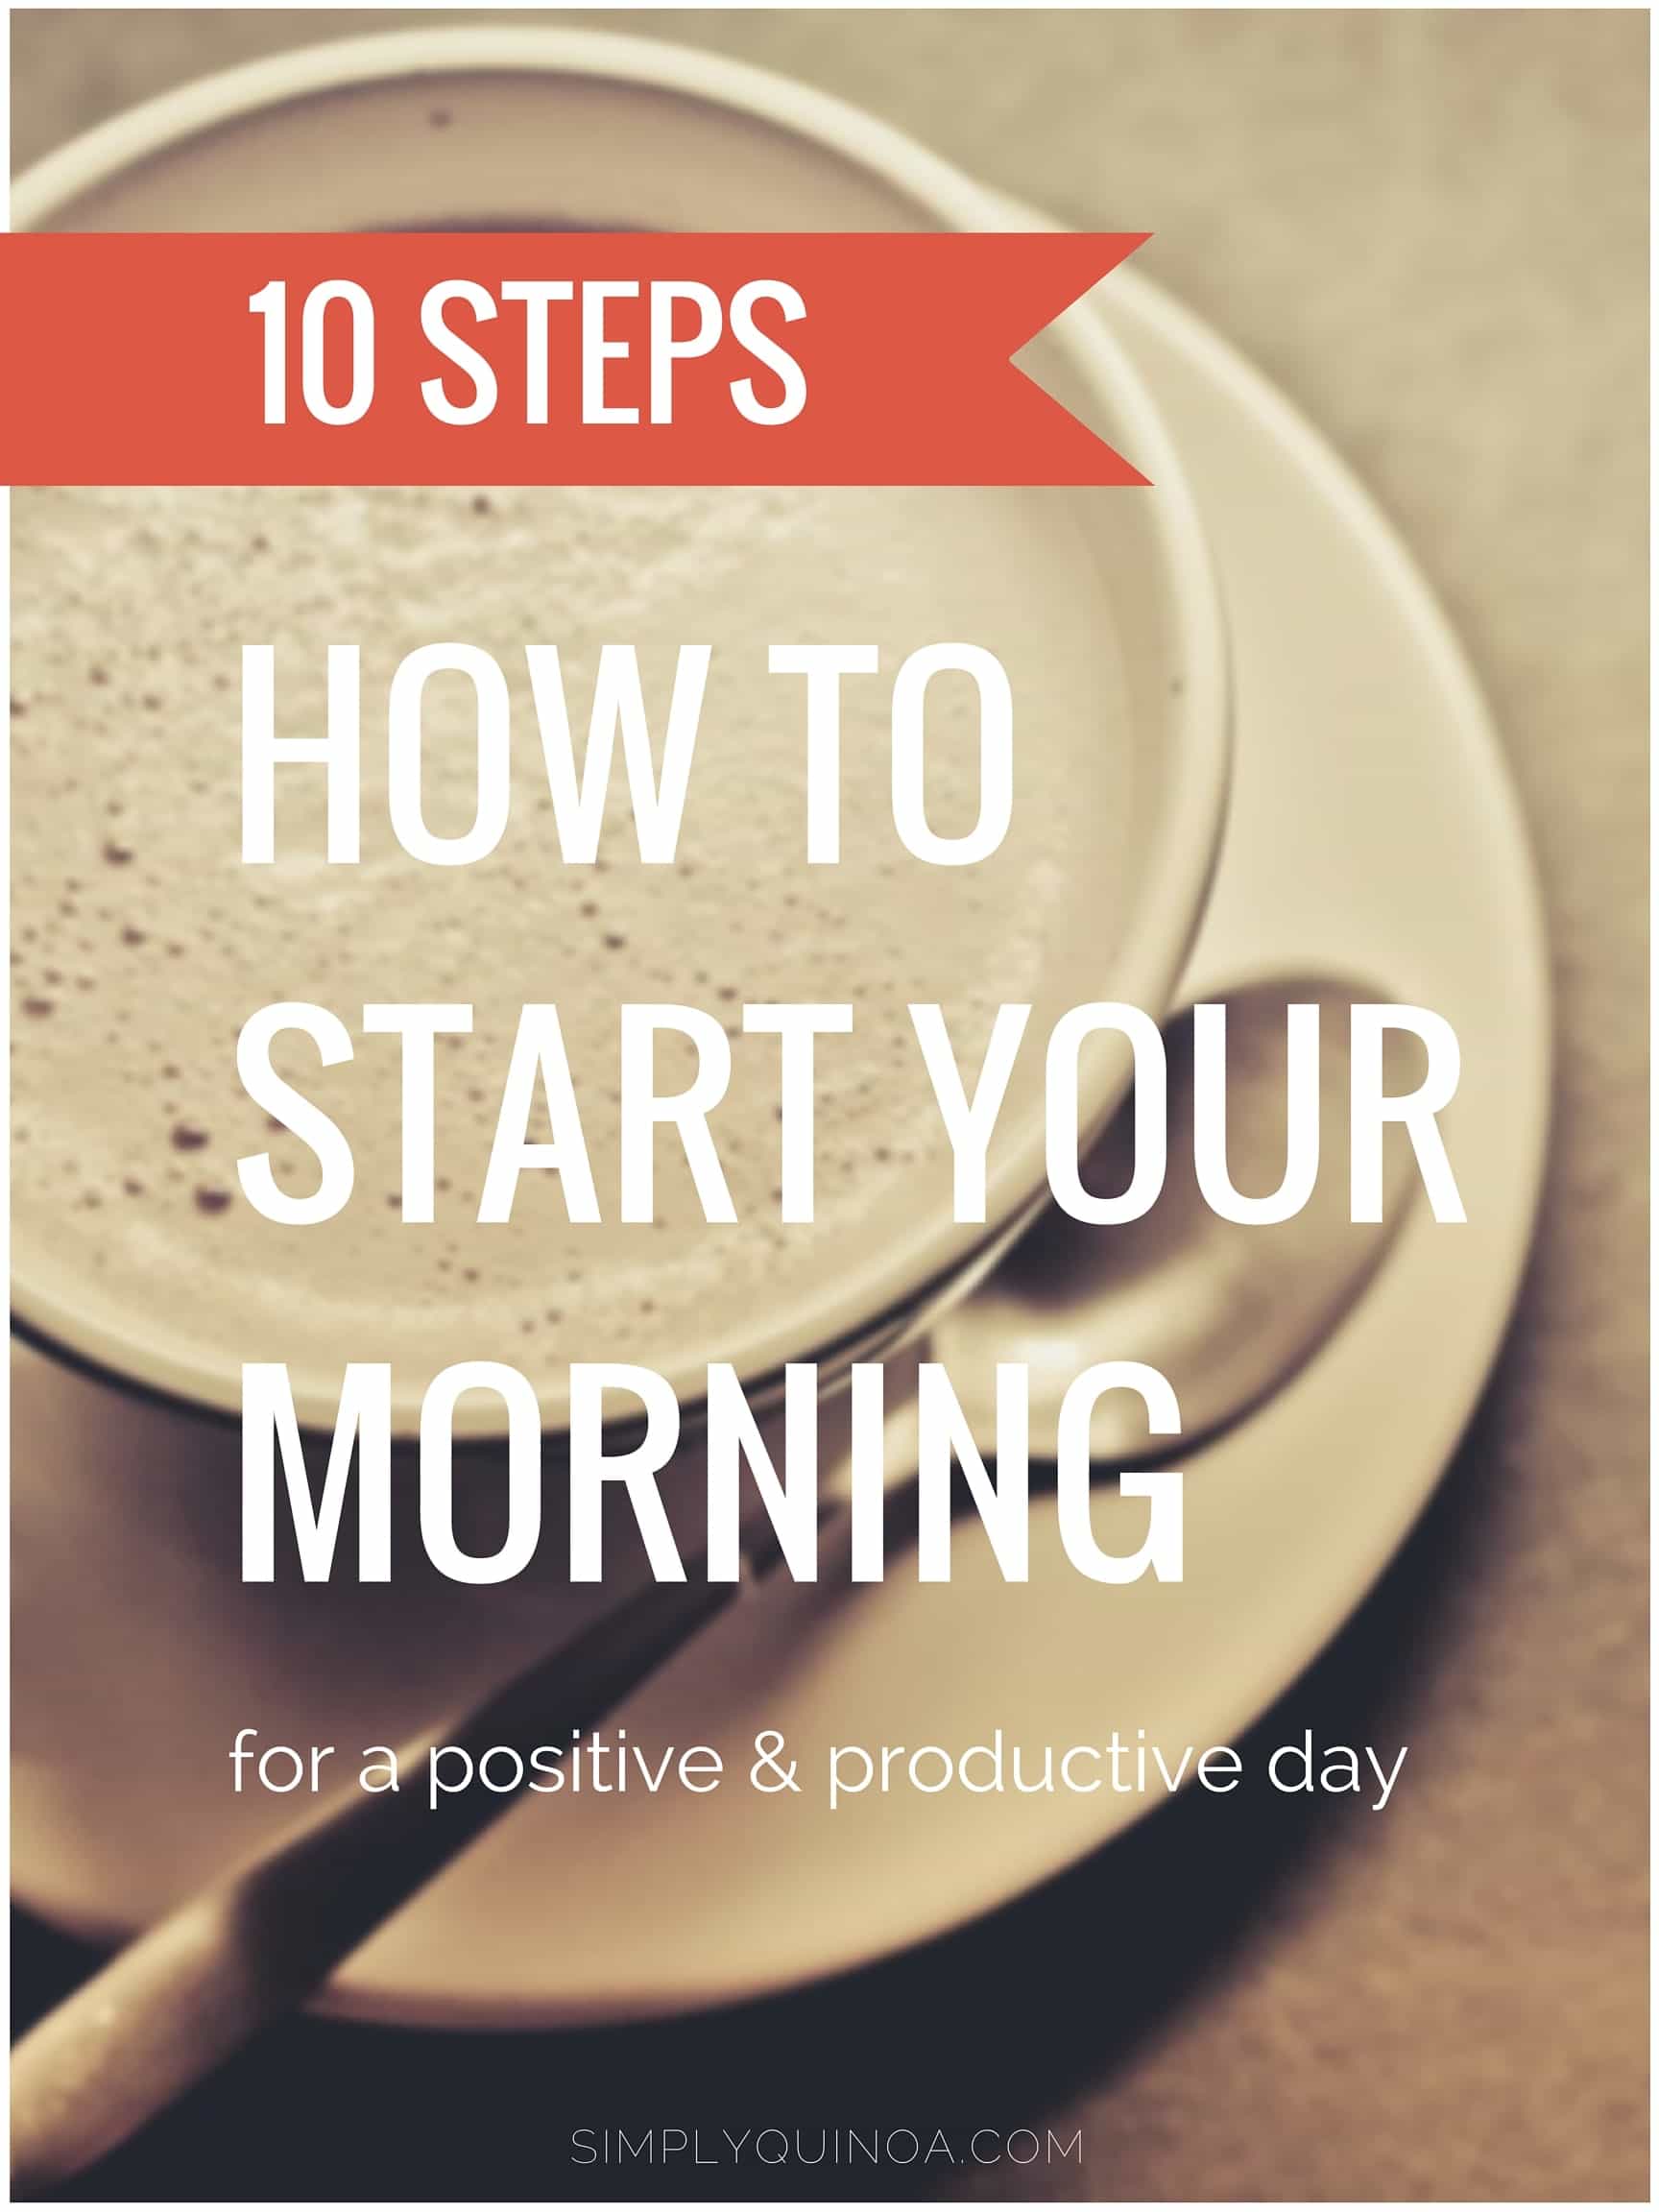 10 Tips: How to Start Your Morning so you have the most positive and productive day possible